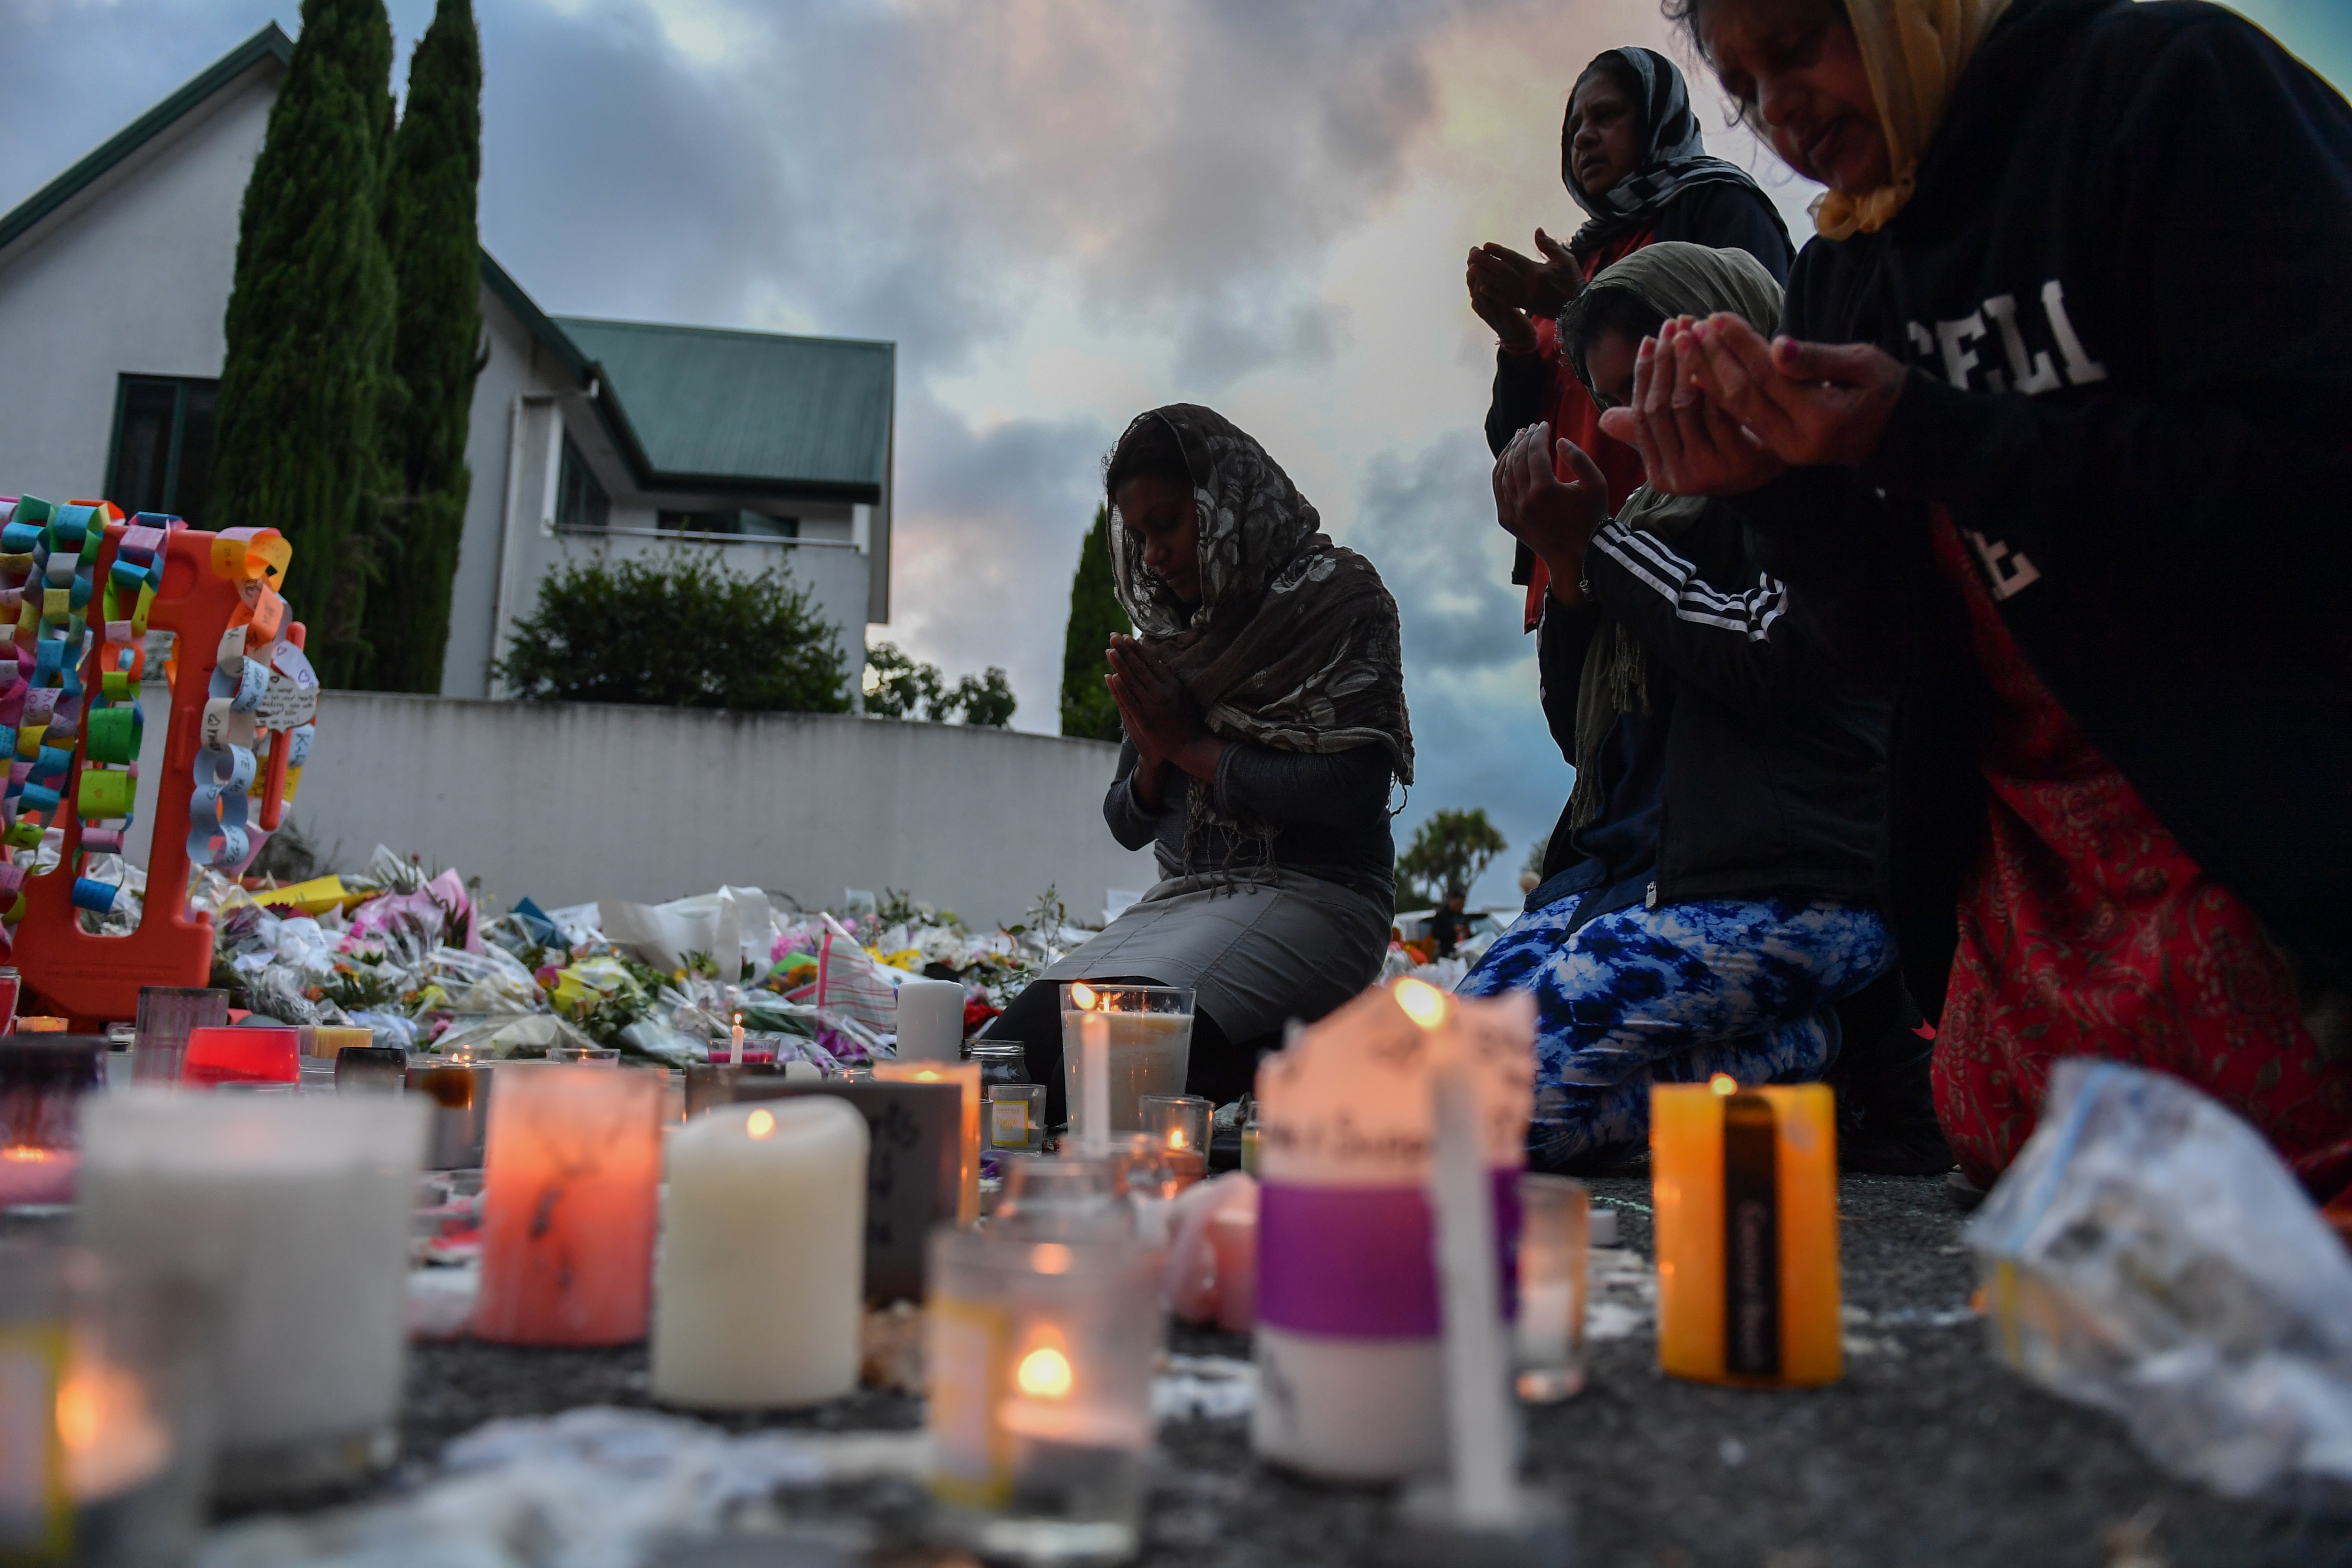 The Christchurch shooter live-streamed his violent attack on social media.